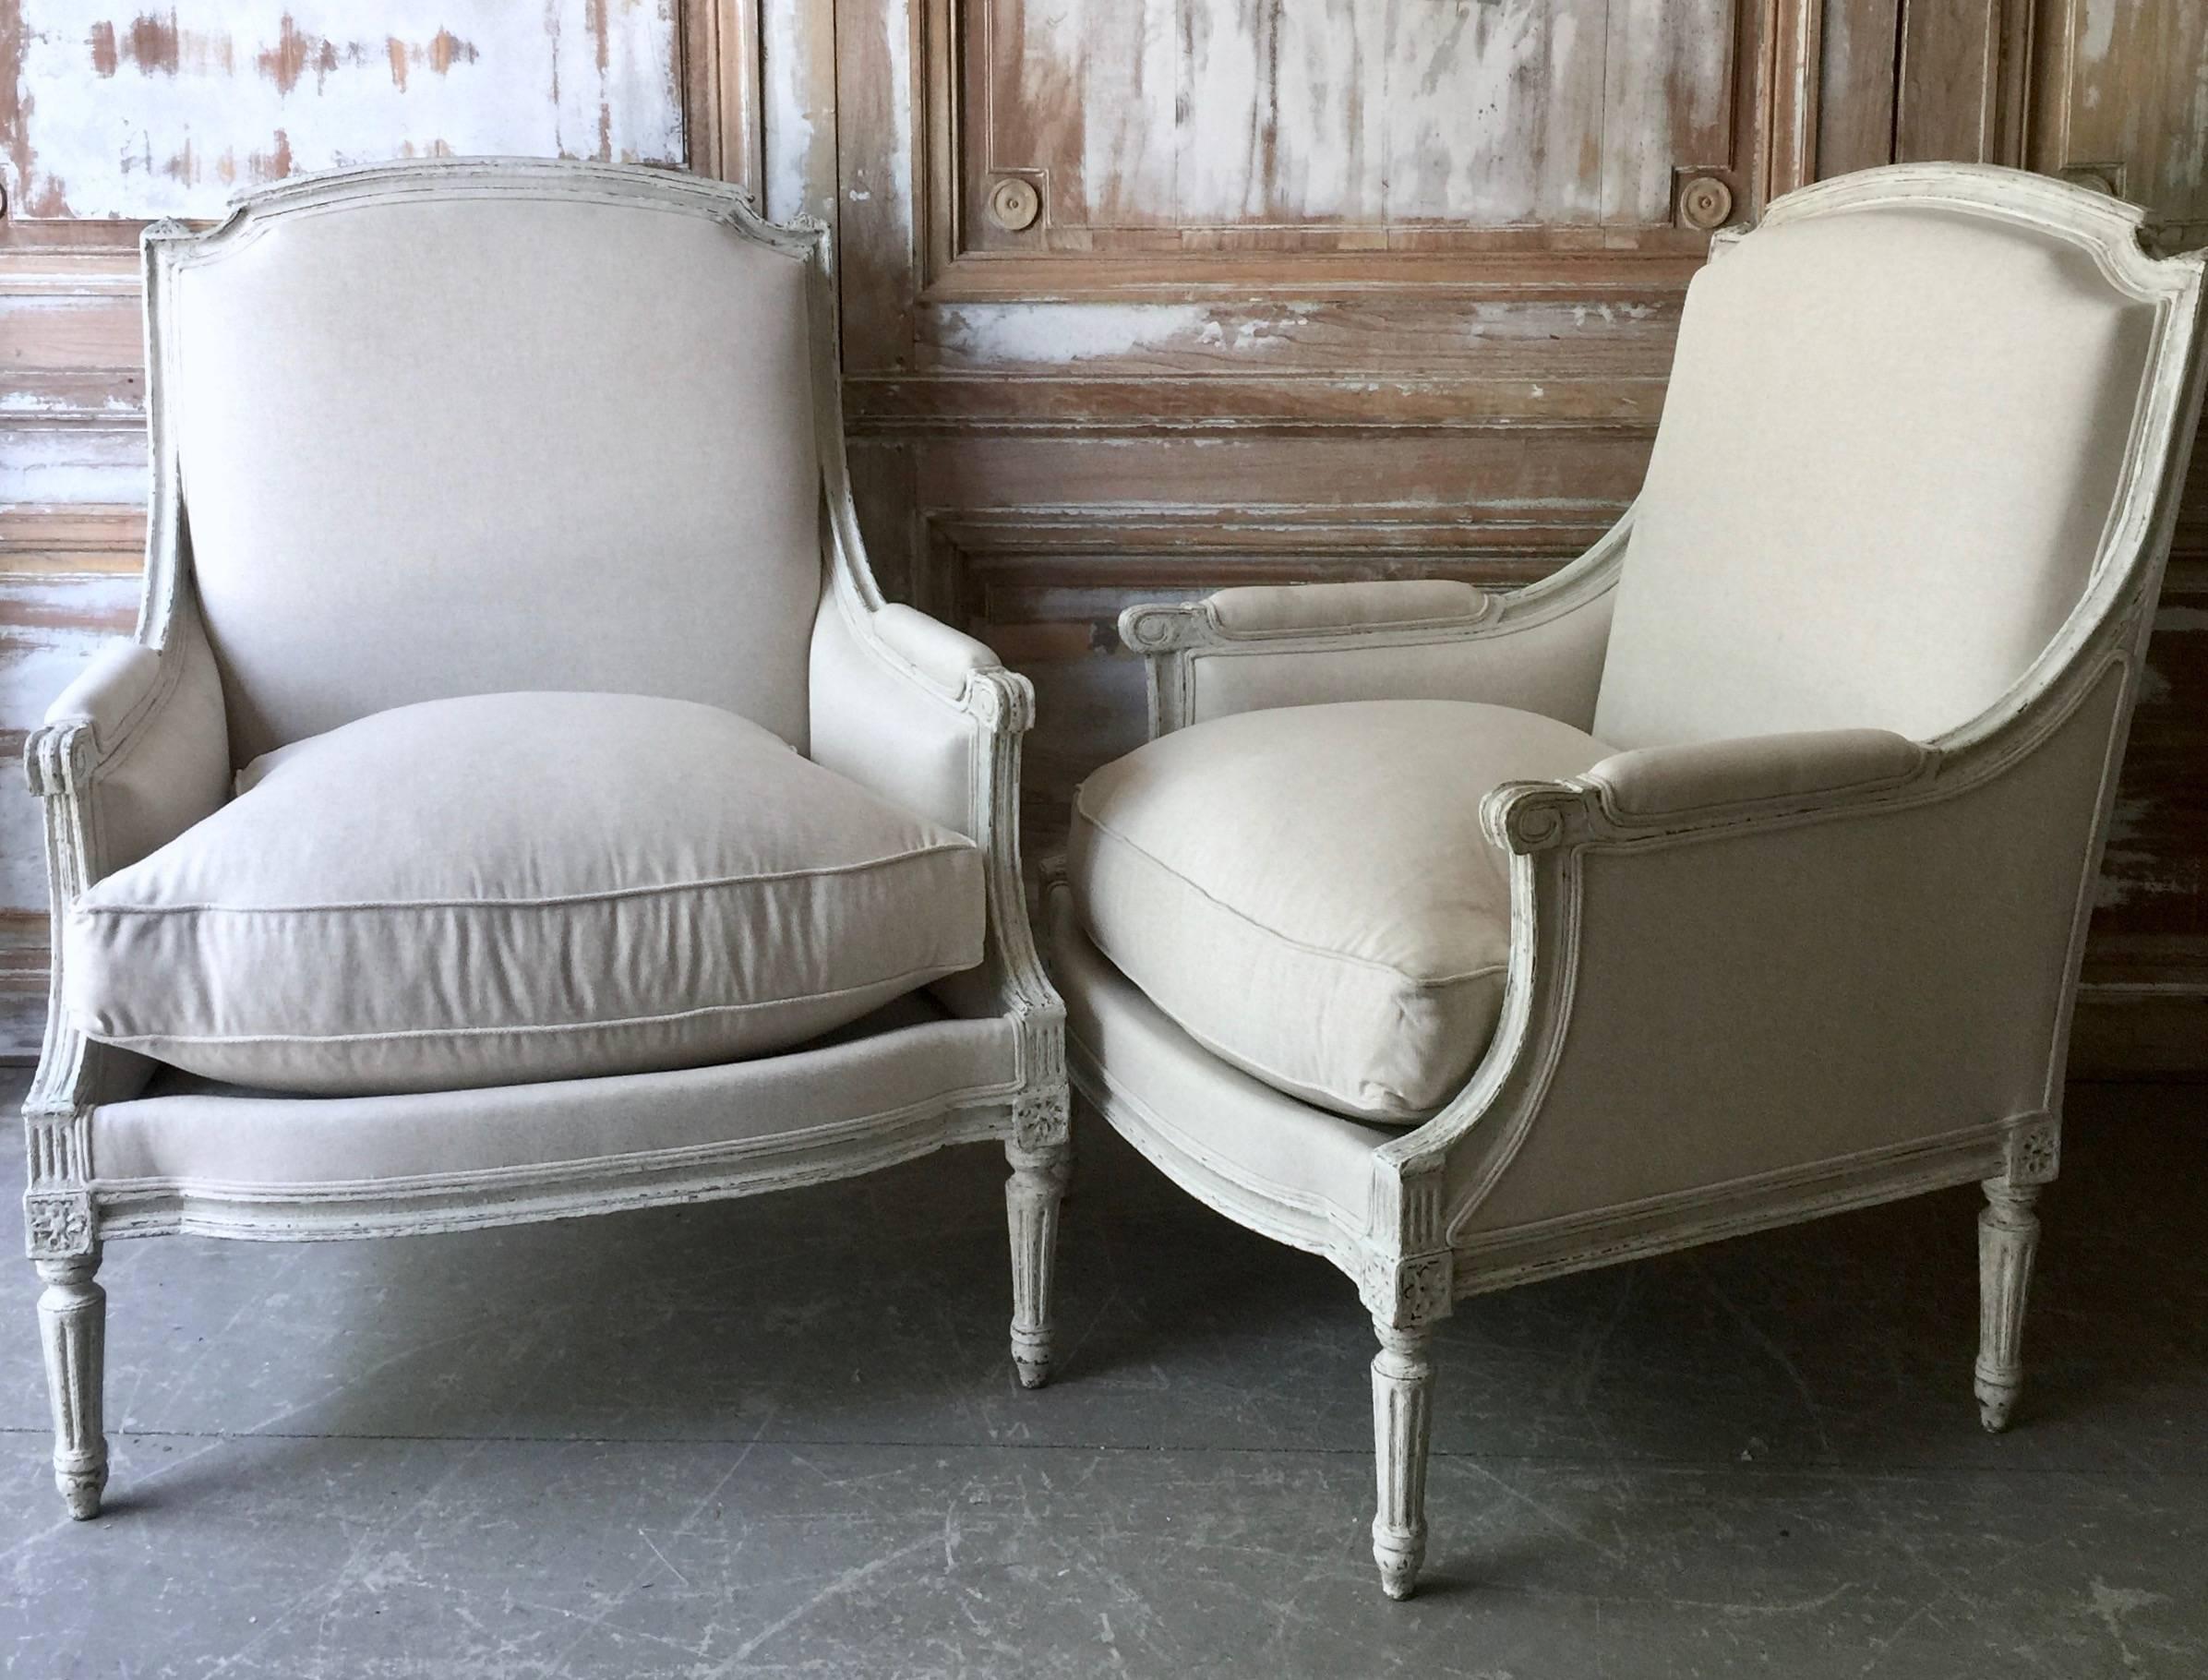 A pair of French painted Bergères in Louis XVI taste, with generous seats and flat backs are "en chapeau" ( arched with the arch-springs indented ) The wood frames are in lovely gray painted finish with richly carved frame, fluted leg and